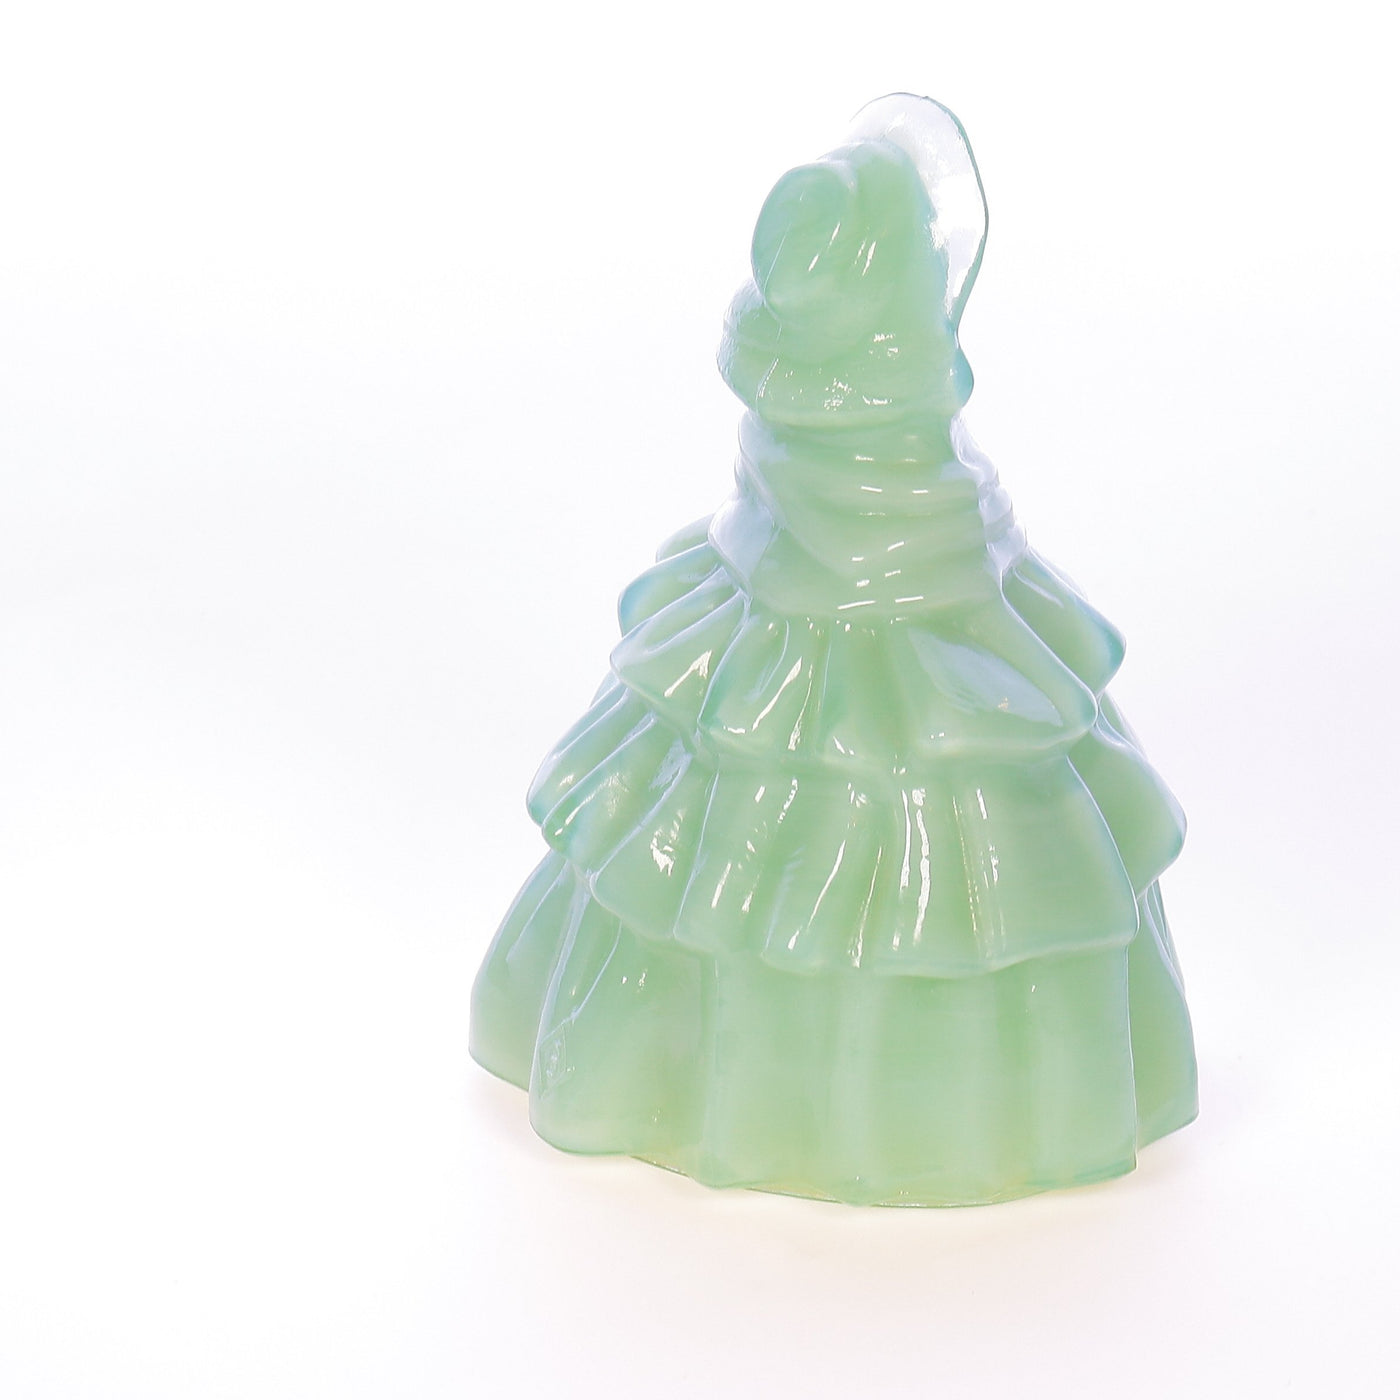 Boyds Crystal Art Glass Vintage Louise the Doll 4.25 Inch Figurine Louise Doll Ice Green 10-23-79 SKU 005